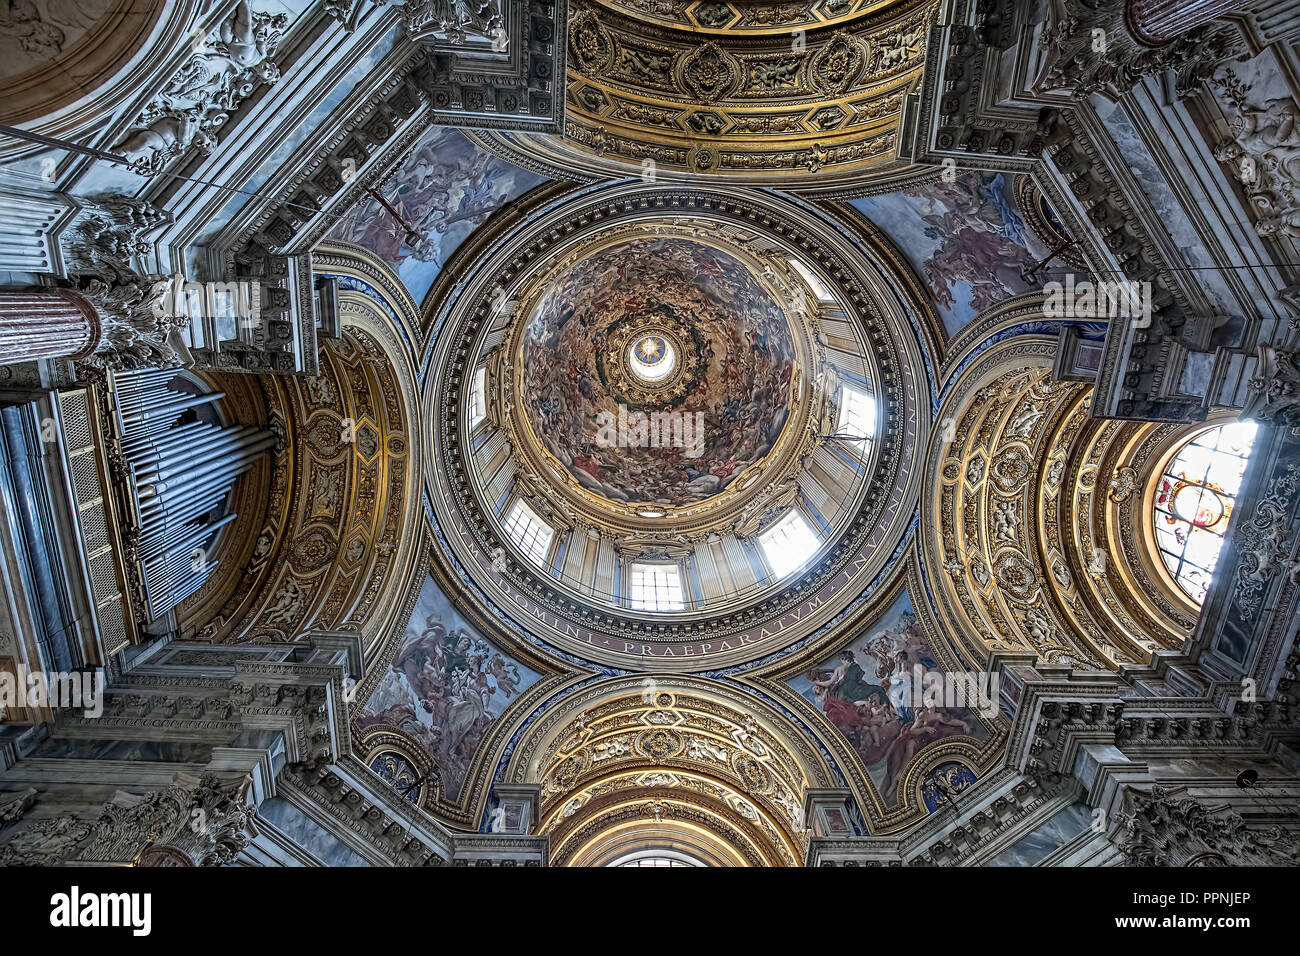 Dome in Sant'Agnese in Agone. View into frescoed cupola and pendentives Stock Photo